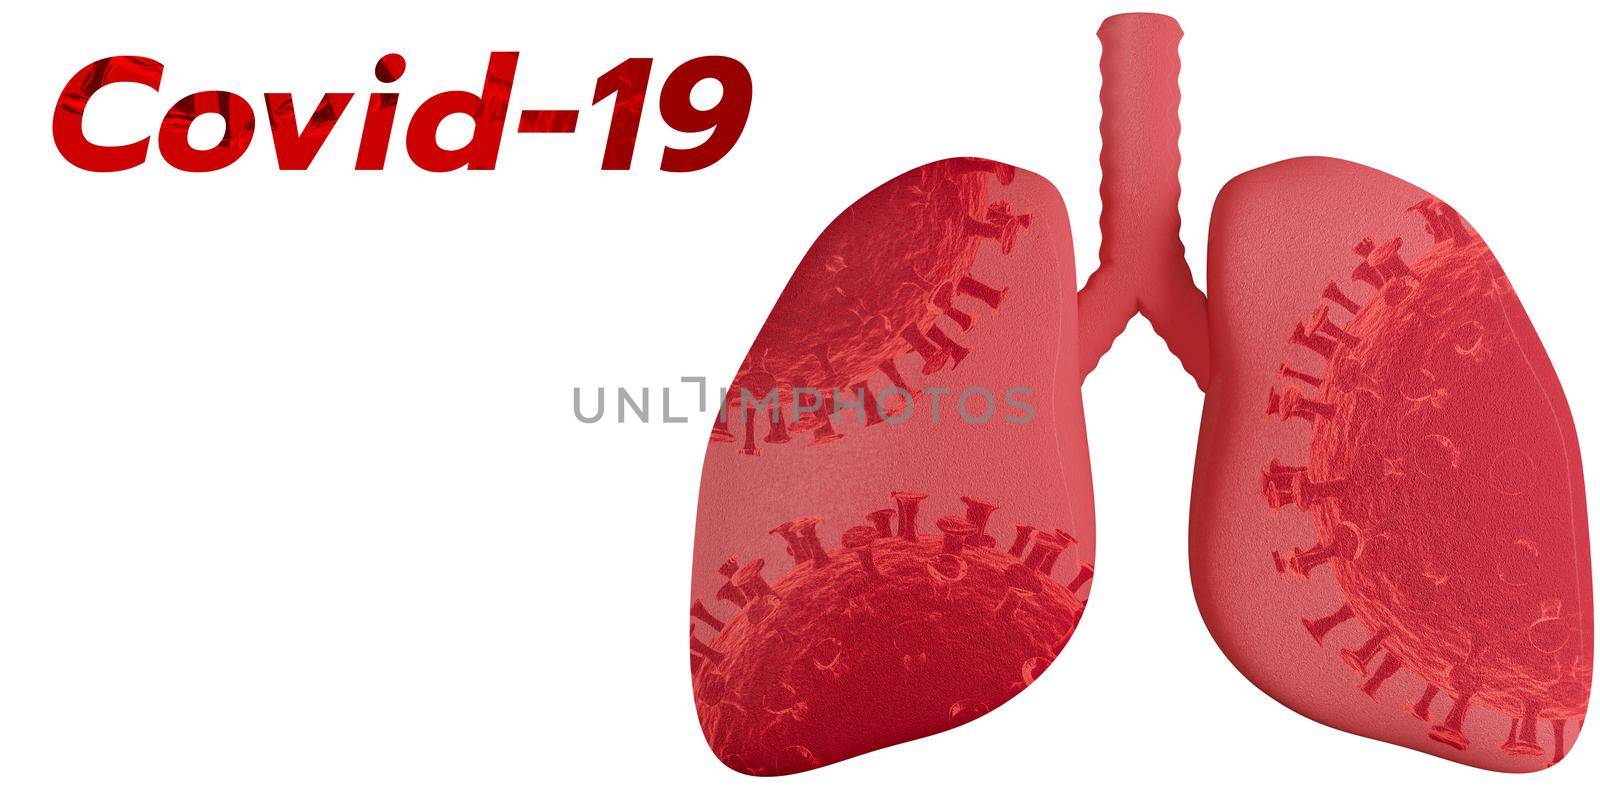 Red text COVID-19 with virus in lung graphic on white background, name for Coronavirus disease. 3d by sirawit99